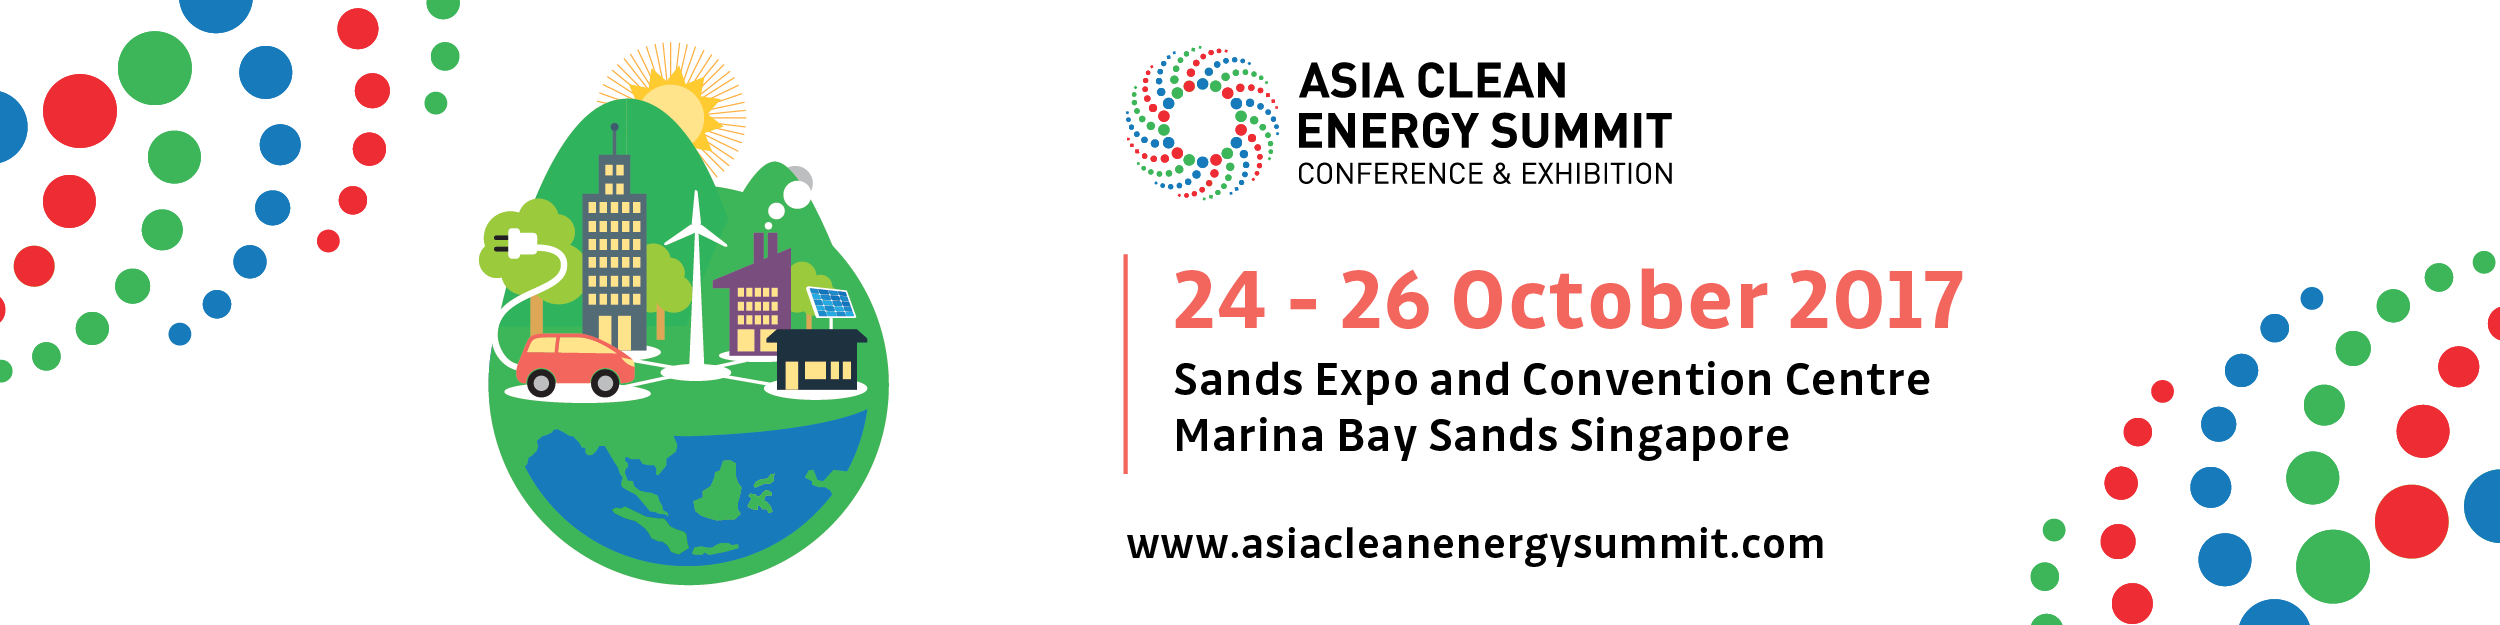 ACES – Clean Energy Hub for Asia